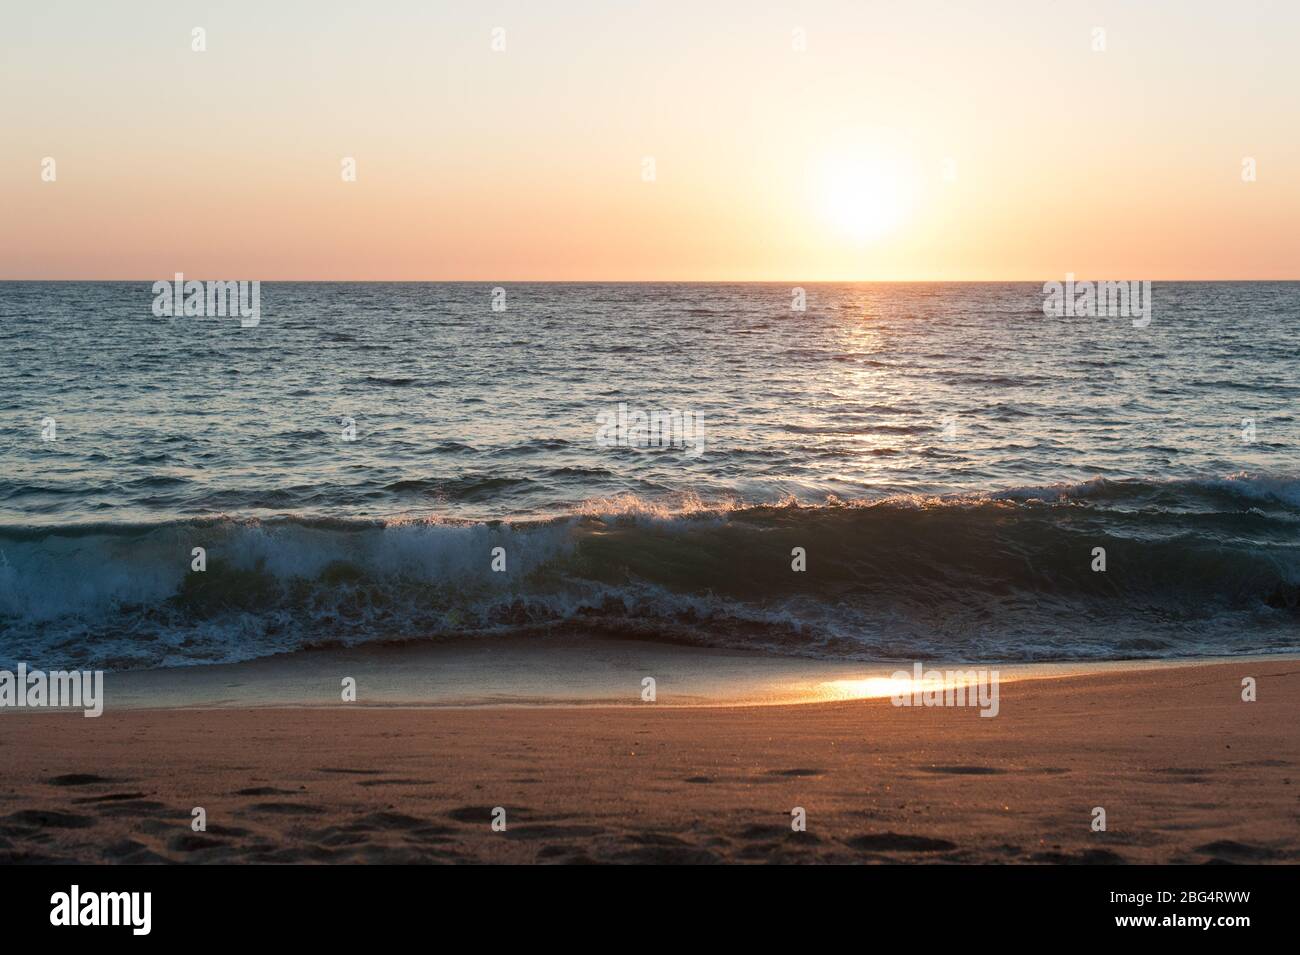 Sun setting over Pacific Ocean at beach in Mexico Stock Photo